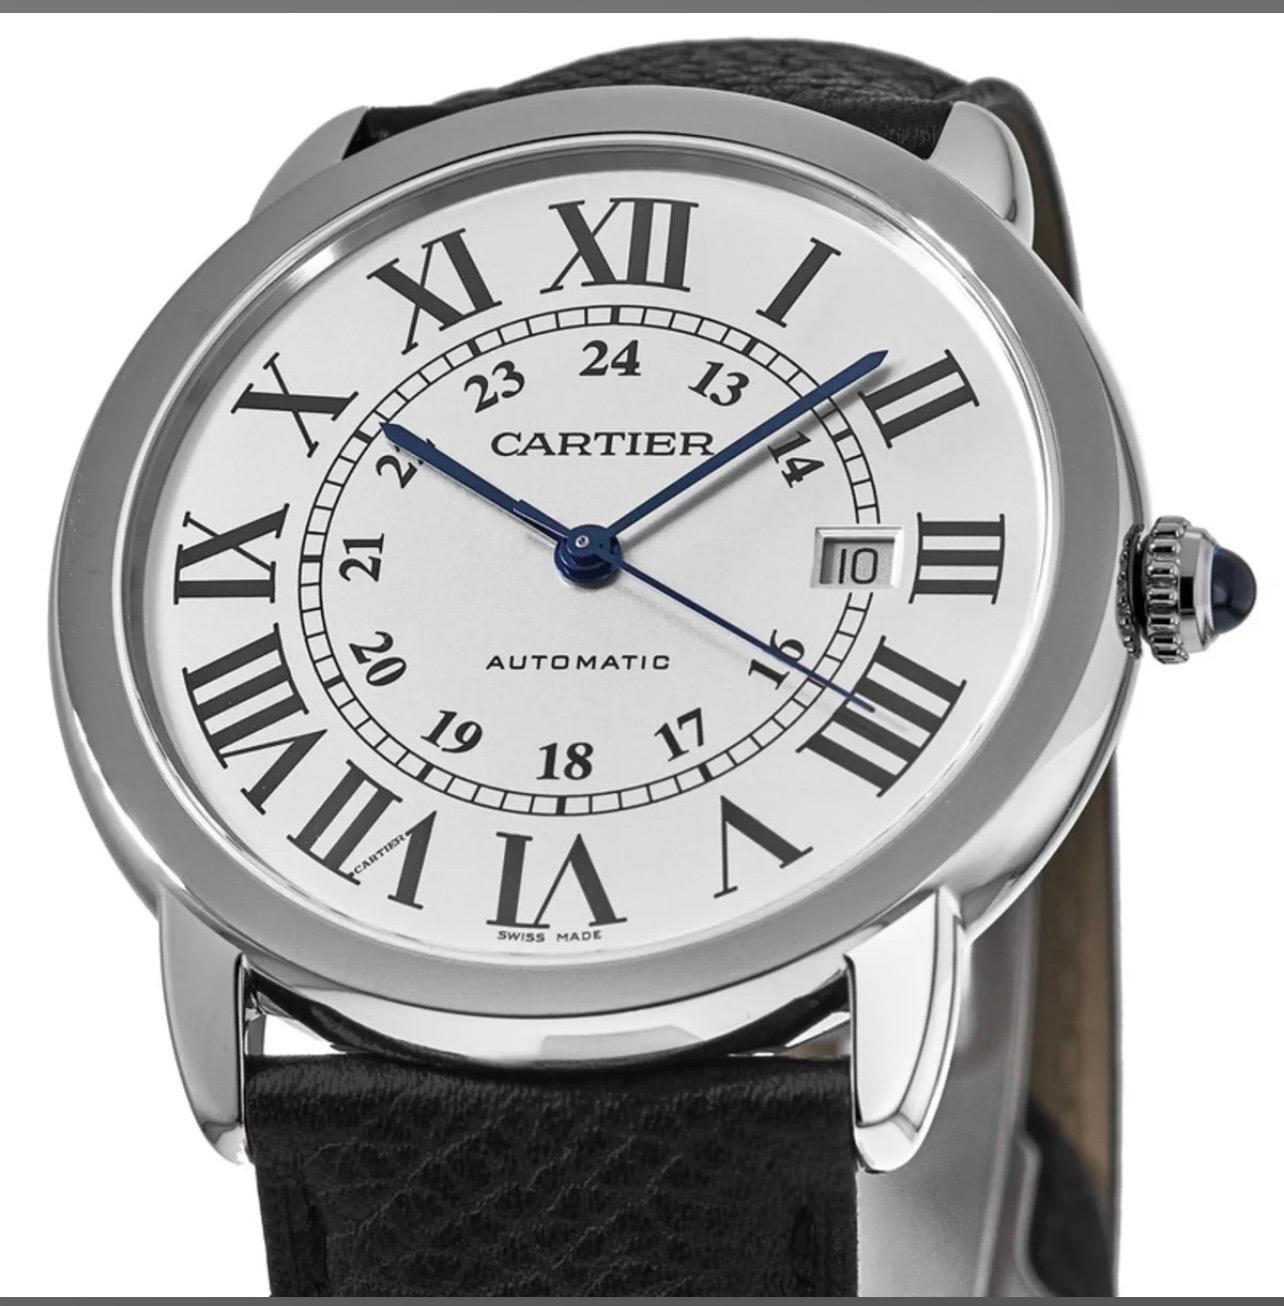 Cartier Ronde Solo Men's  Automatic Steel Watch 821650TX
Its in super excellent condition like new 
3517 , Swiss Made
Water Resistant
Stainless-steel
Leather Belt , Made in France GTI
Case diameter: 42 mm
With Manufacturer Serial Numbers
- Roman